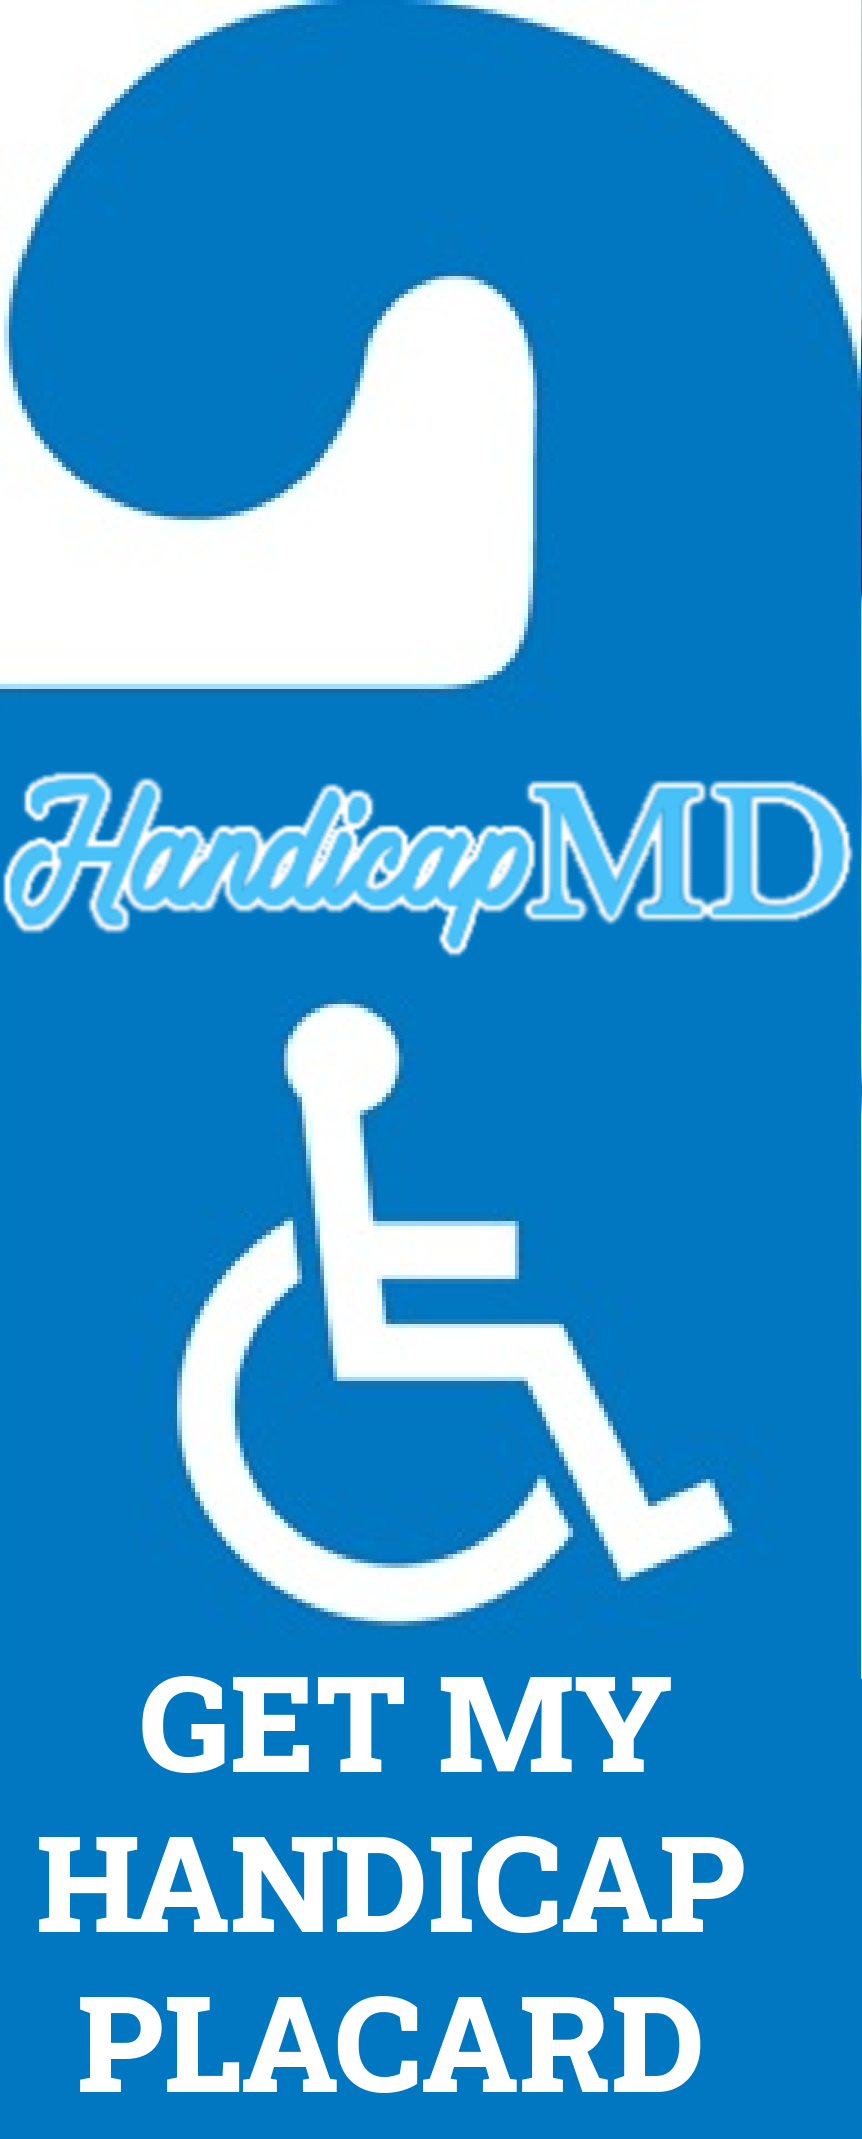 How To Get A Handicap Parking Placard Renewal in Hawaii